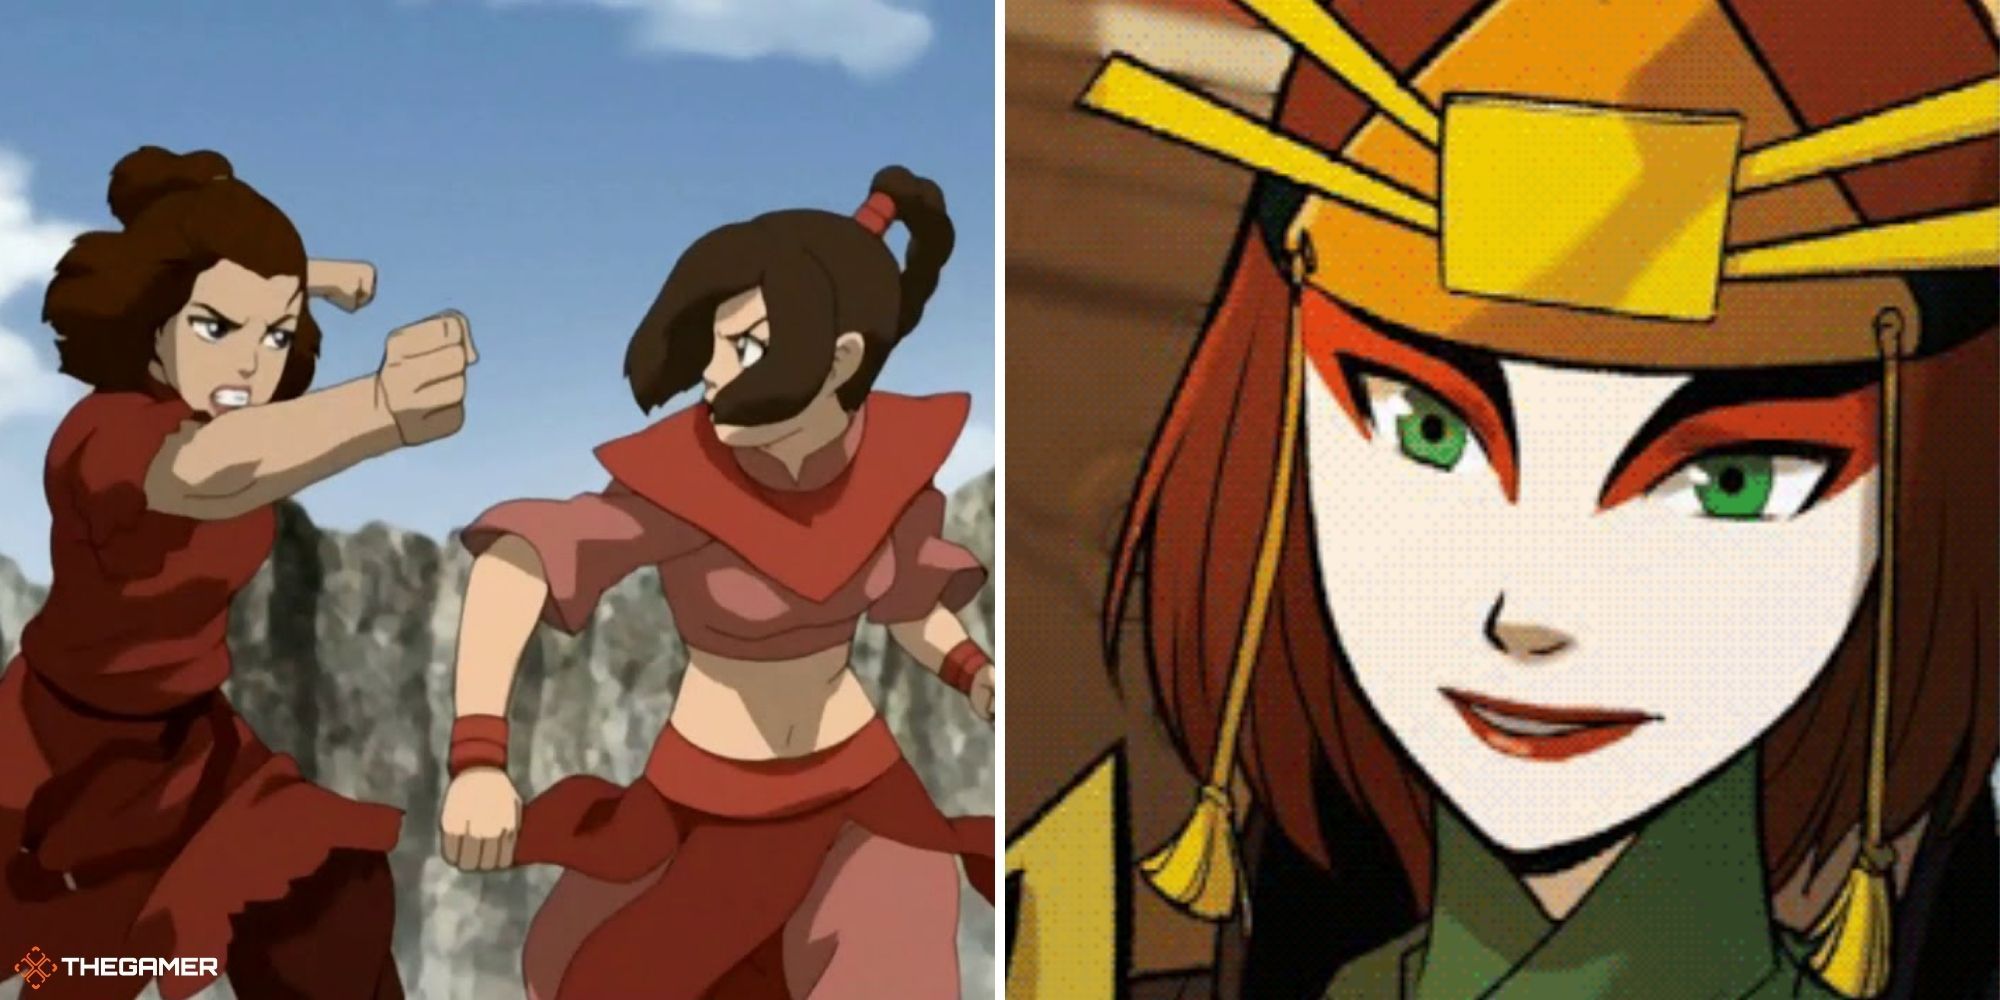 Avatar the last airbender - Suki and Ty Lee (1)